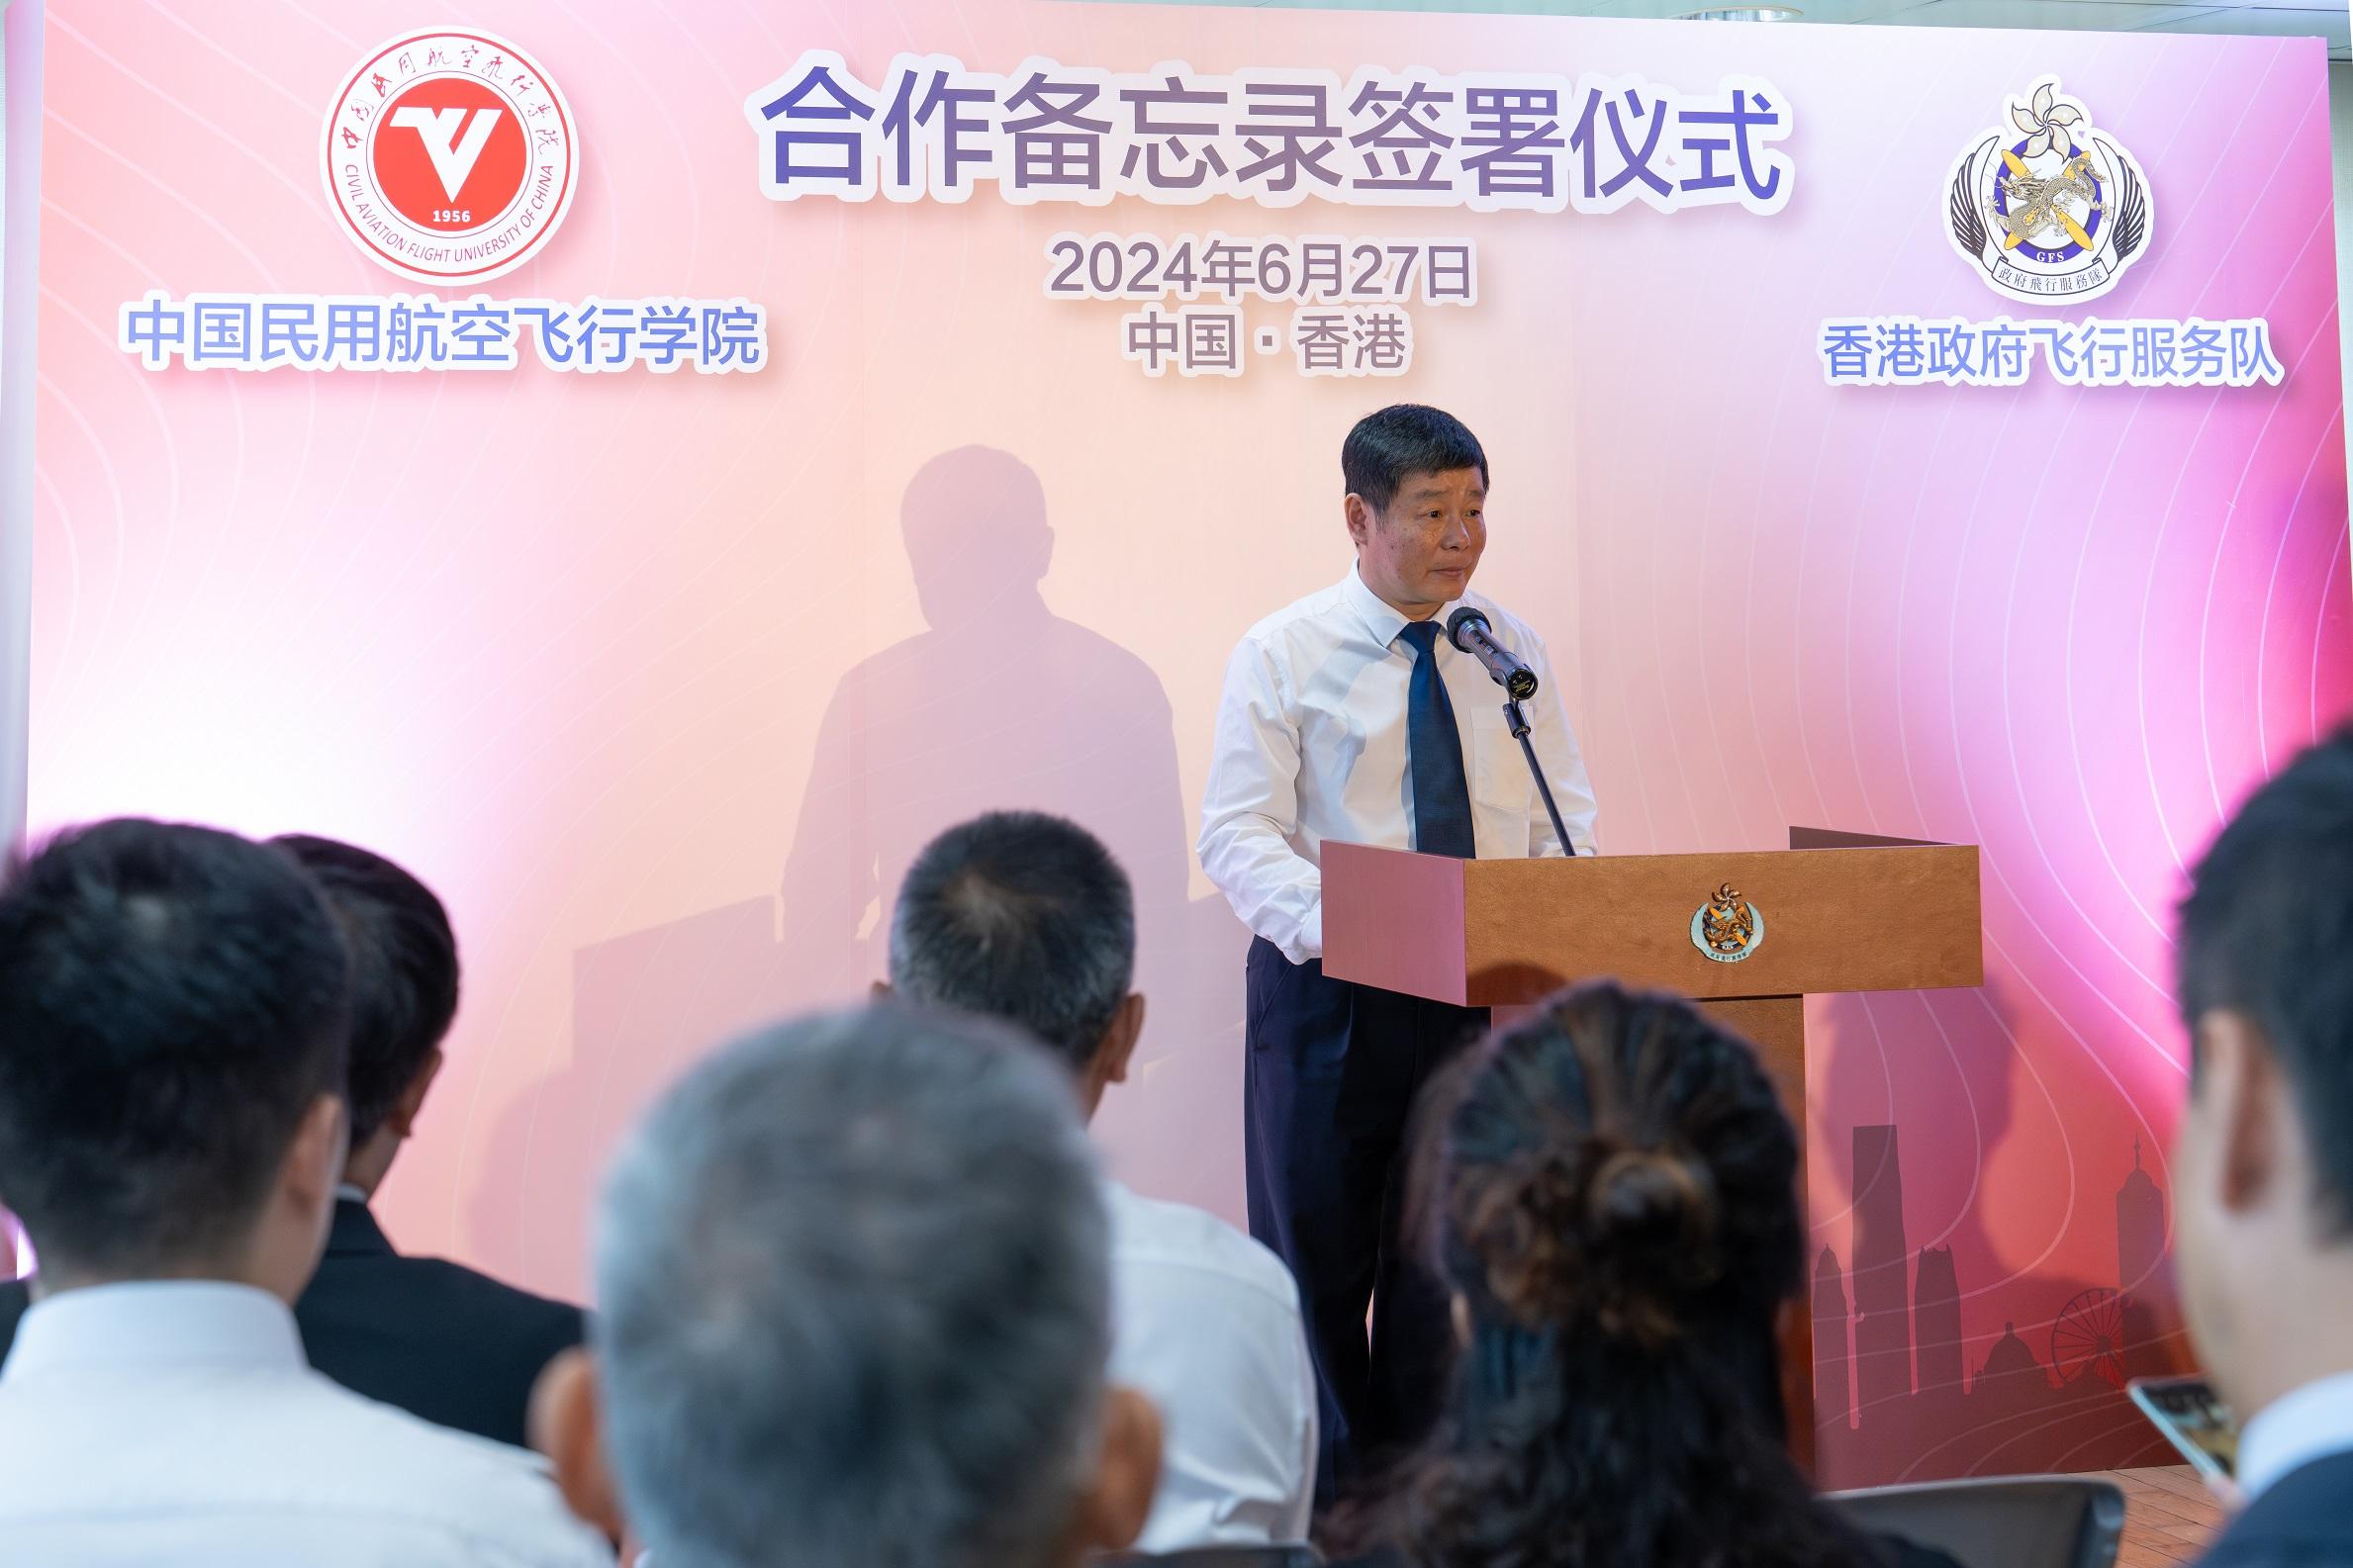 The Government Flying Service and the Civil Aviation Flight University of China (CAFUC) signed a memorandum of understanding today (June 27) to underpin closer collaboration. Photo shows Vice-President of the CAFUC Mr Ouyang Ting delivering a speech at the signing ceremony.